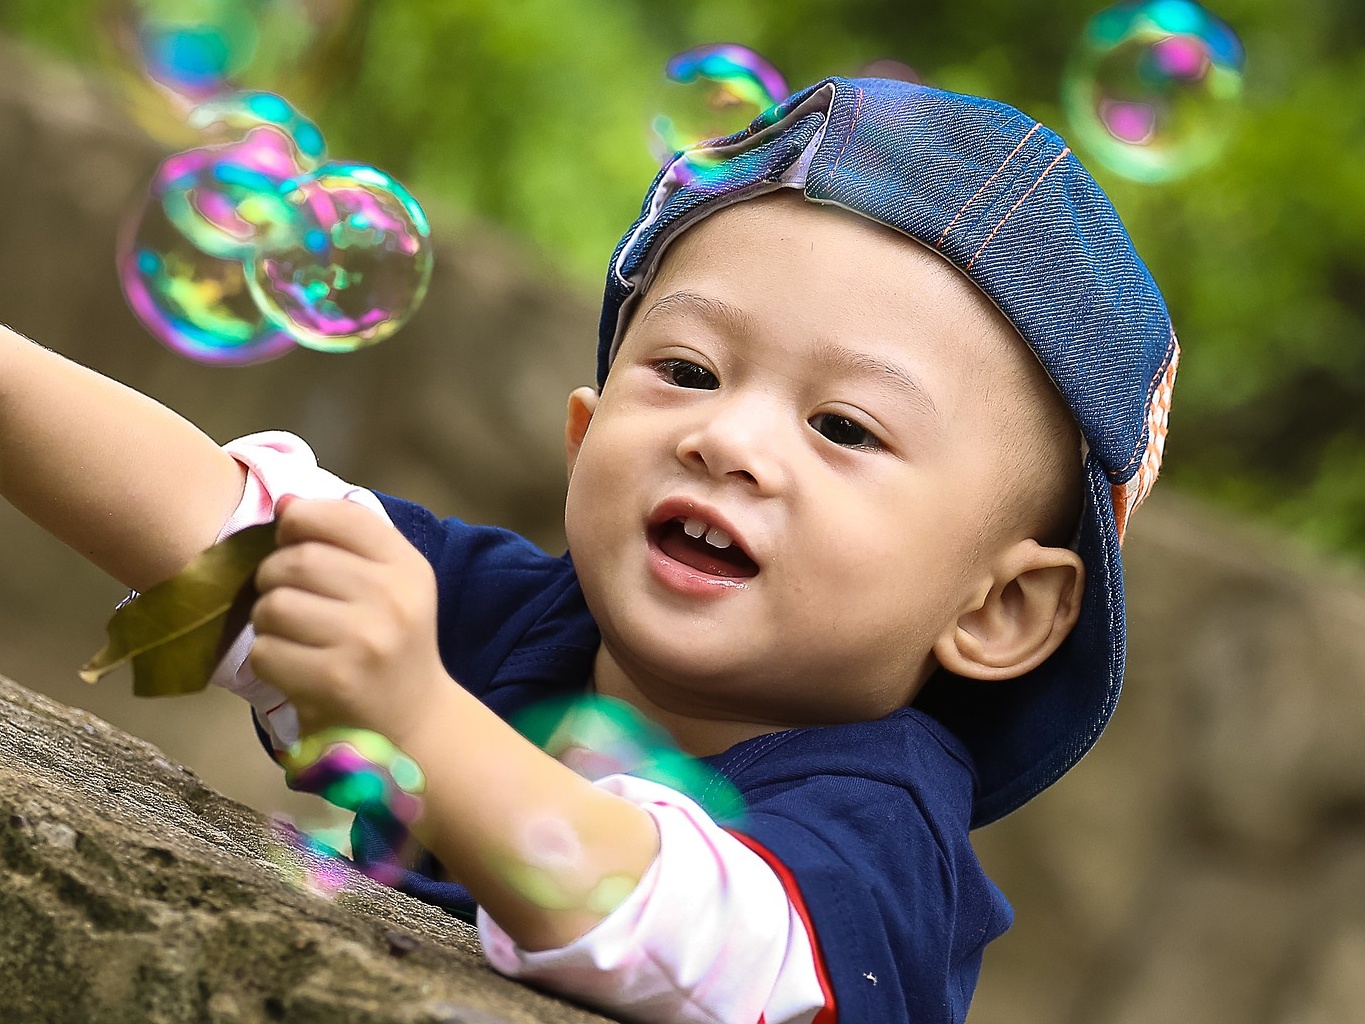 Baby in backwards hat plays with pretty pink and green bubbles outdoors.